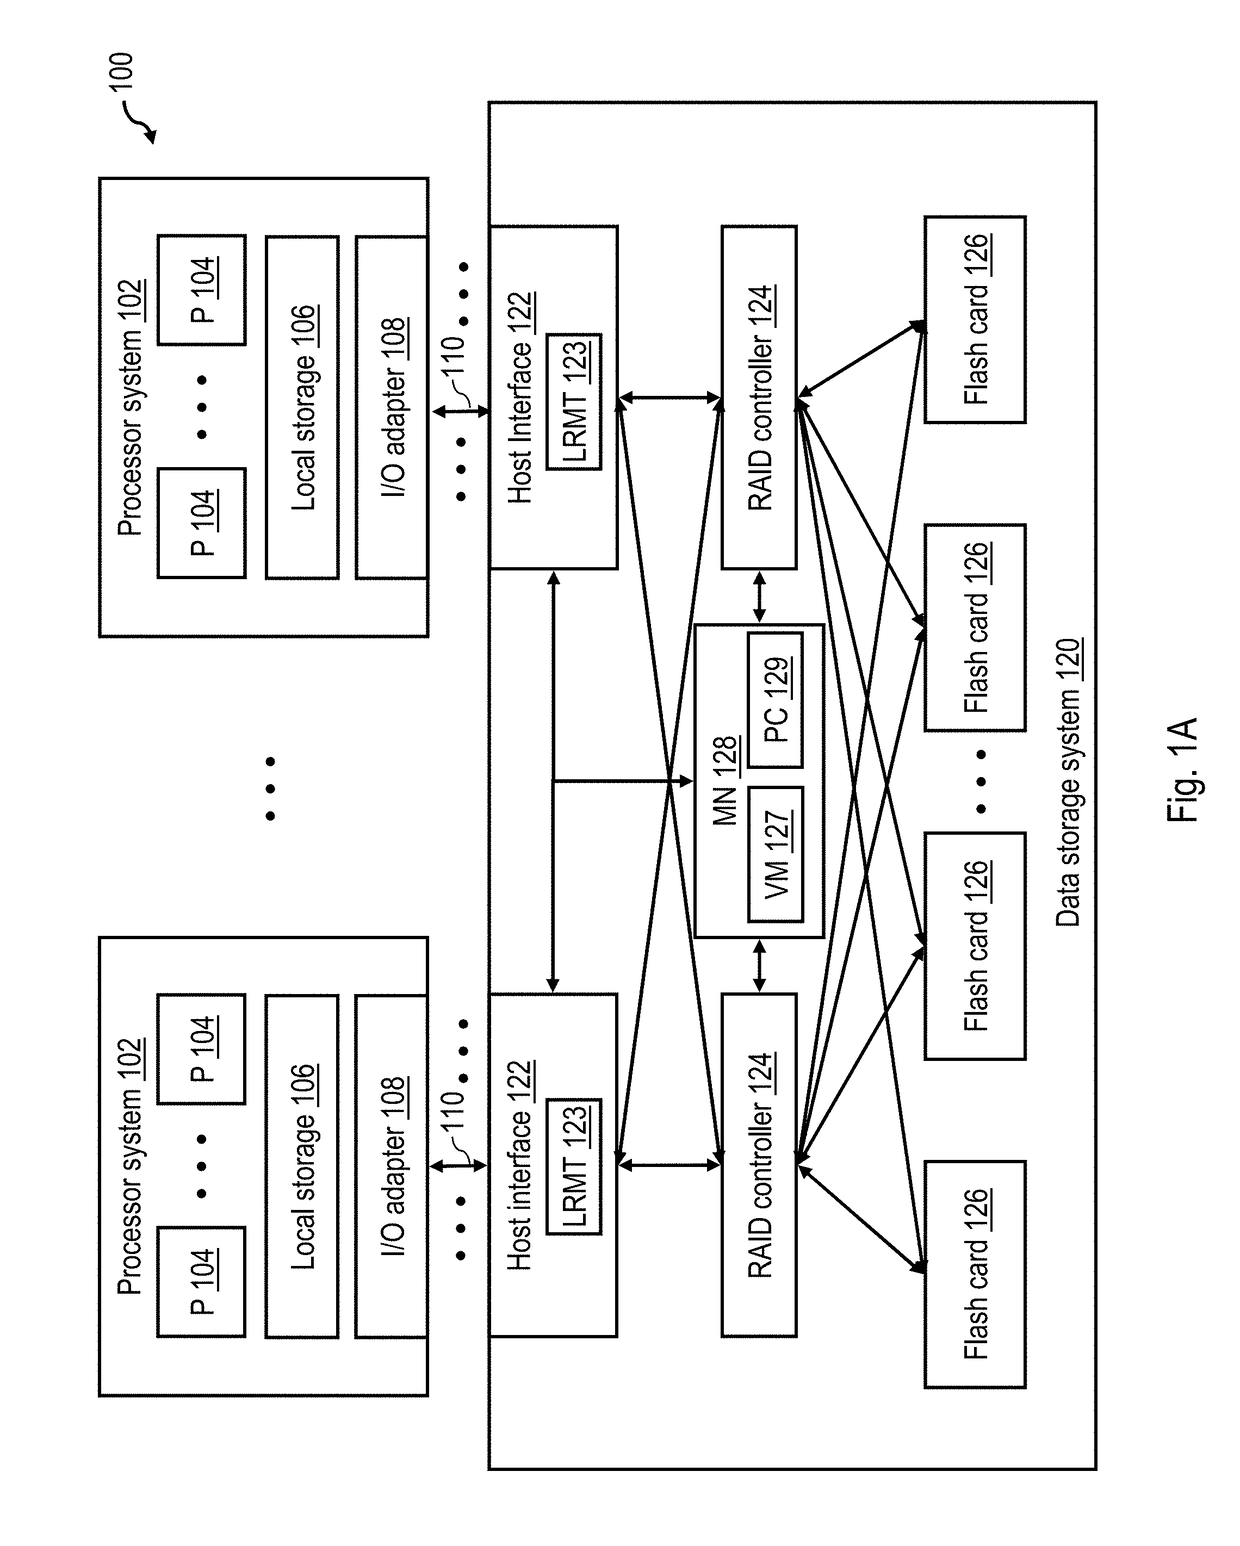 Optimizing thin provisioning in a data storage system through selective use of multiple grain sizes